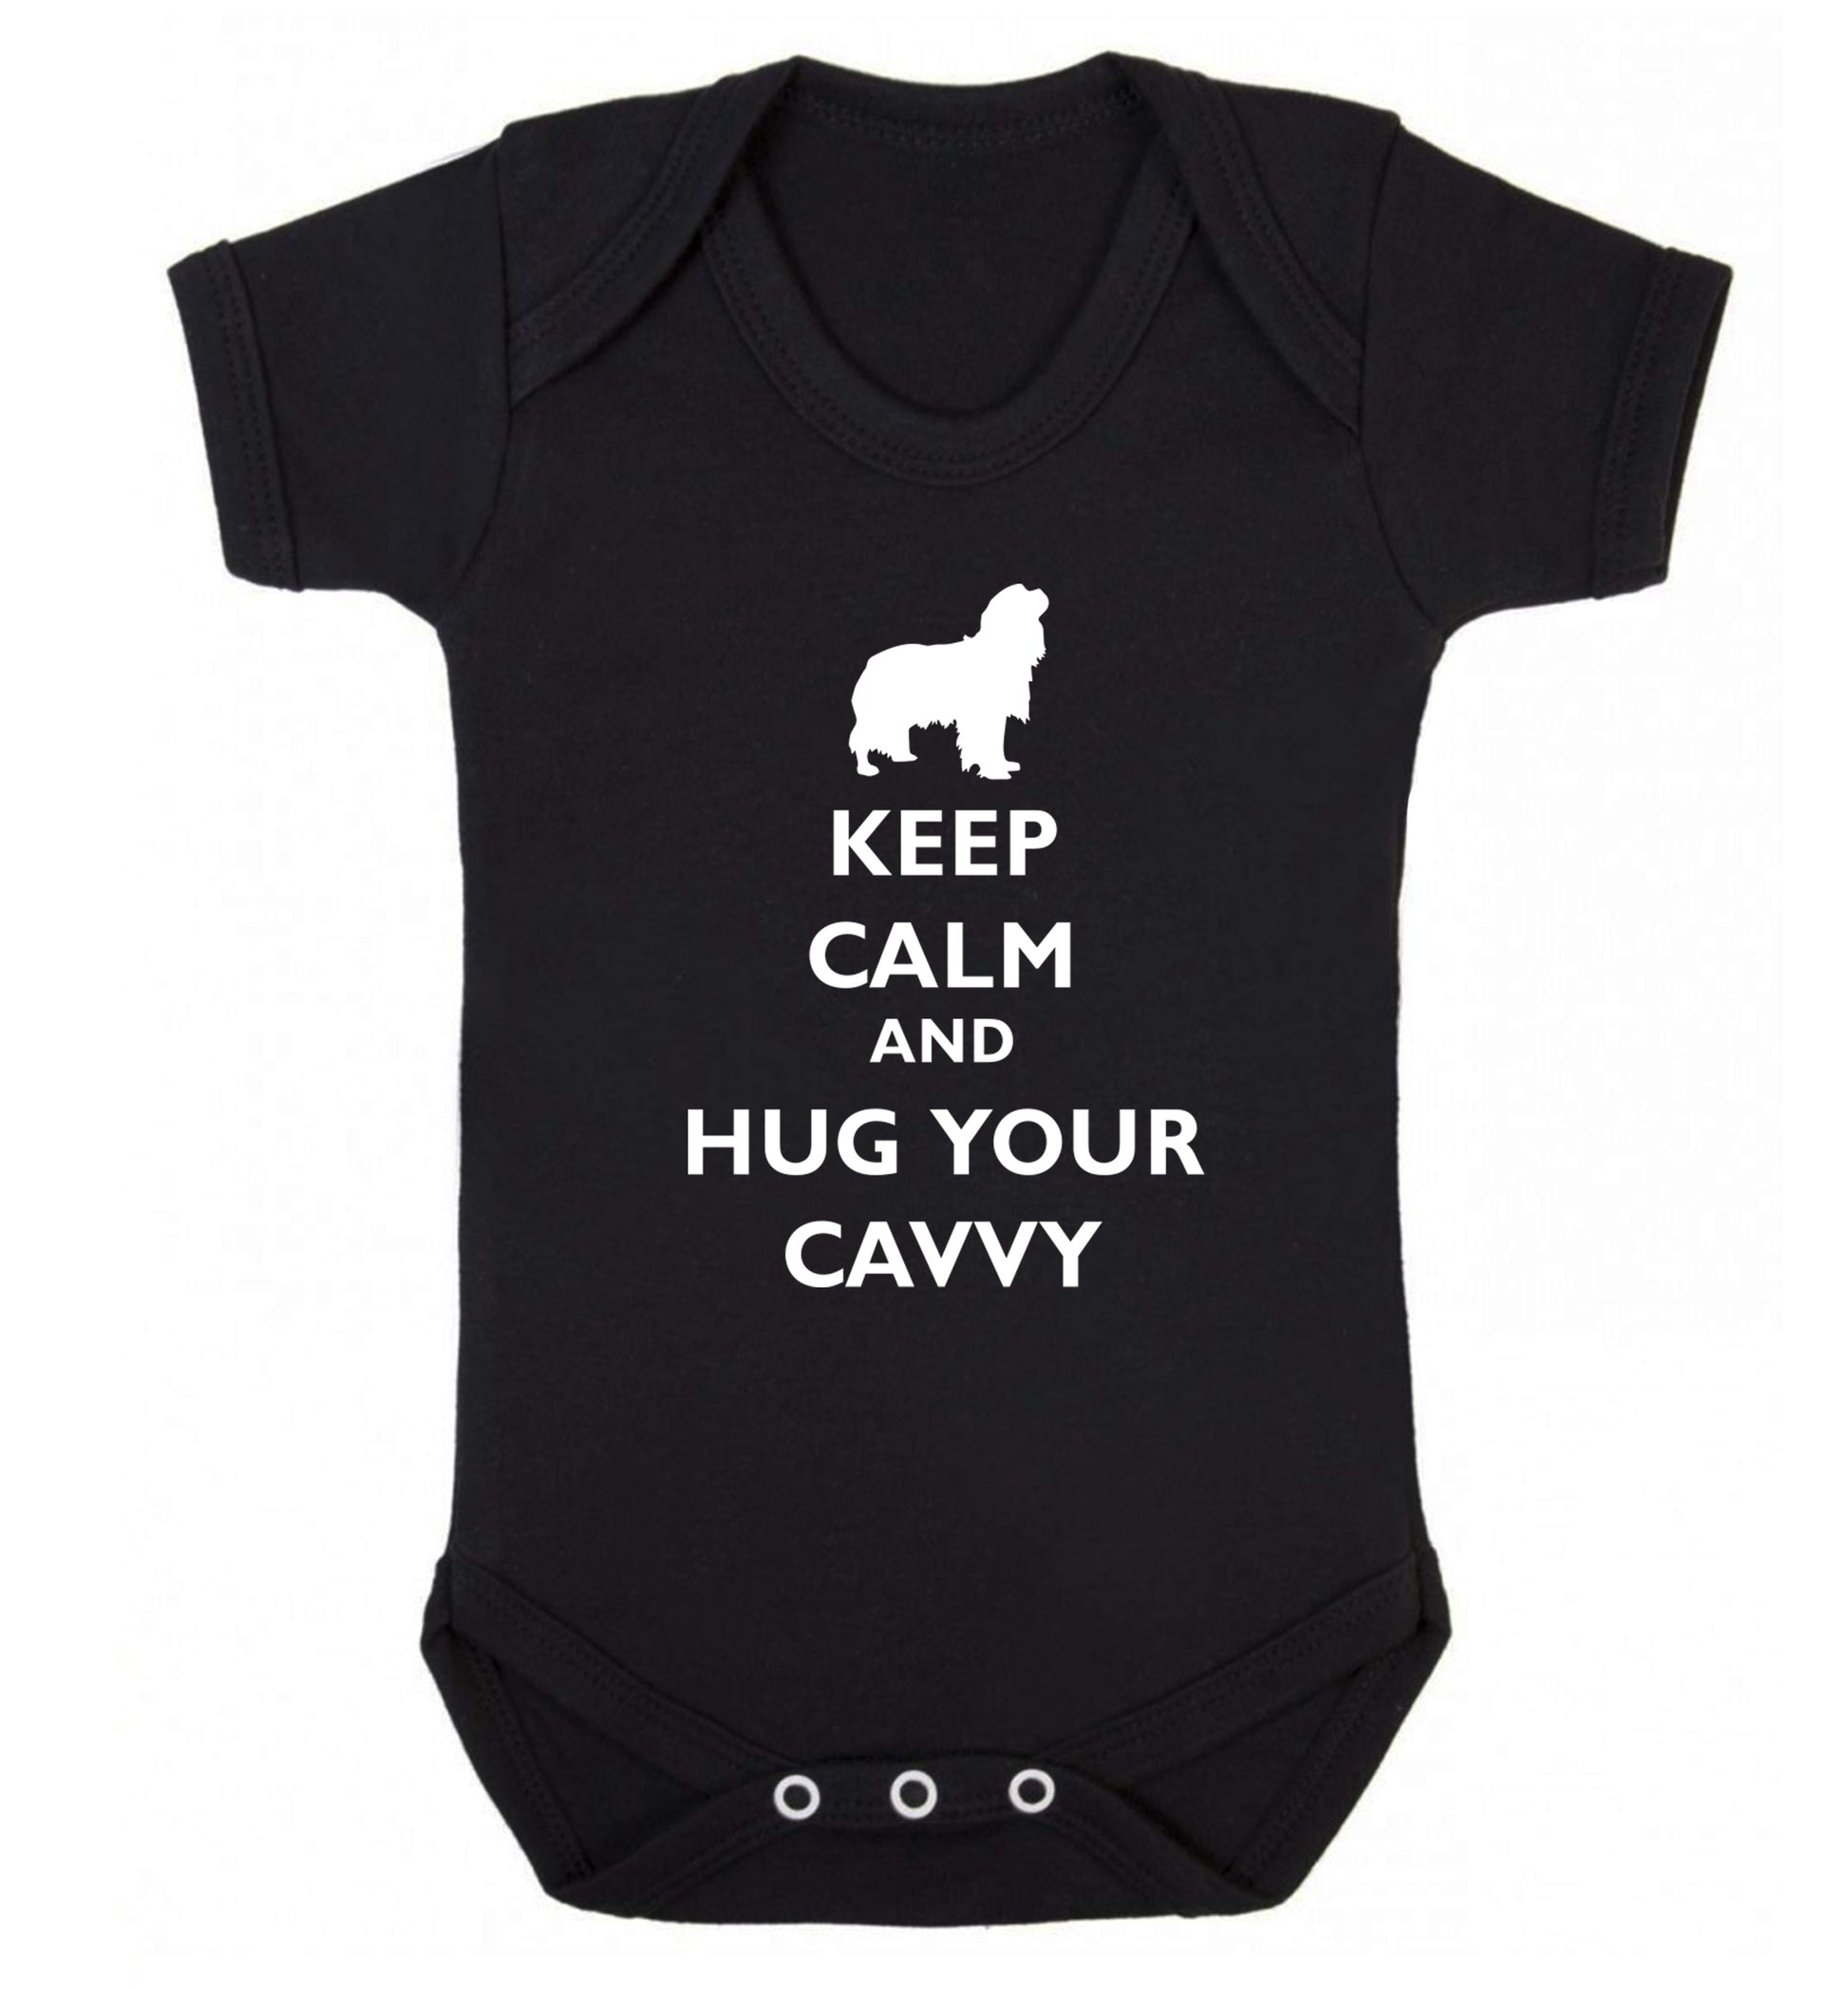 Keep calm and hug your cavvy Baby Vest black 18-24 months